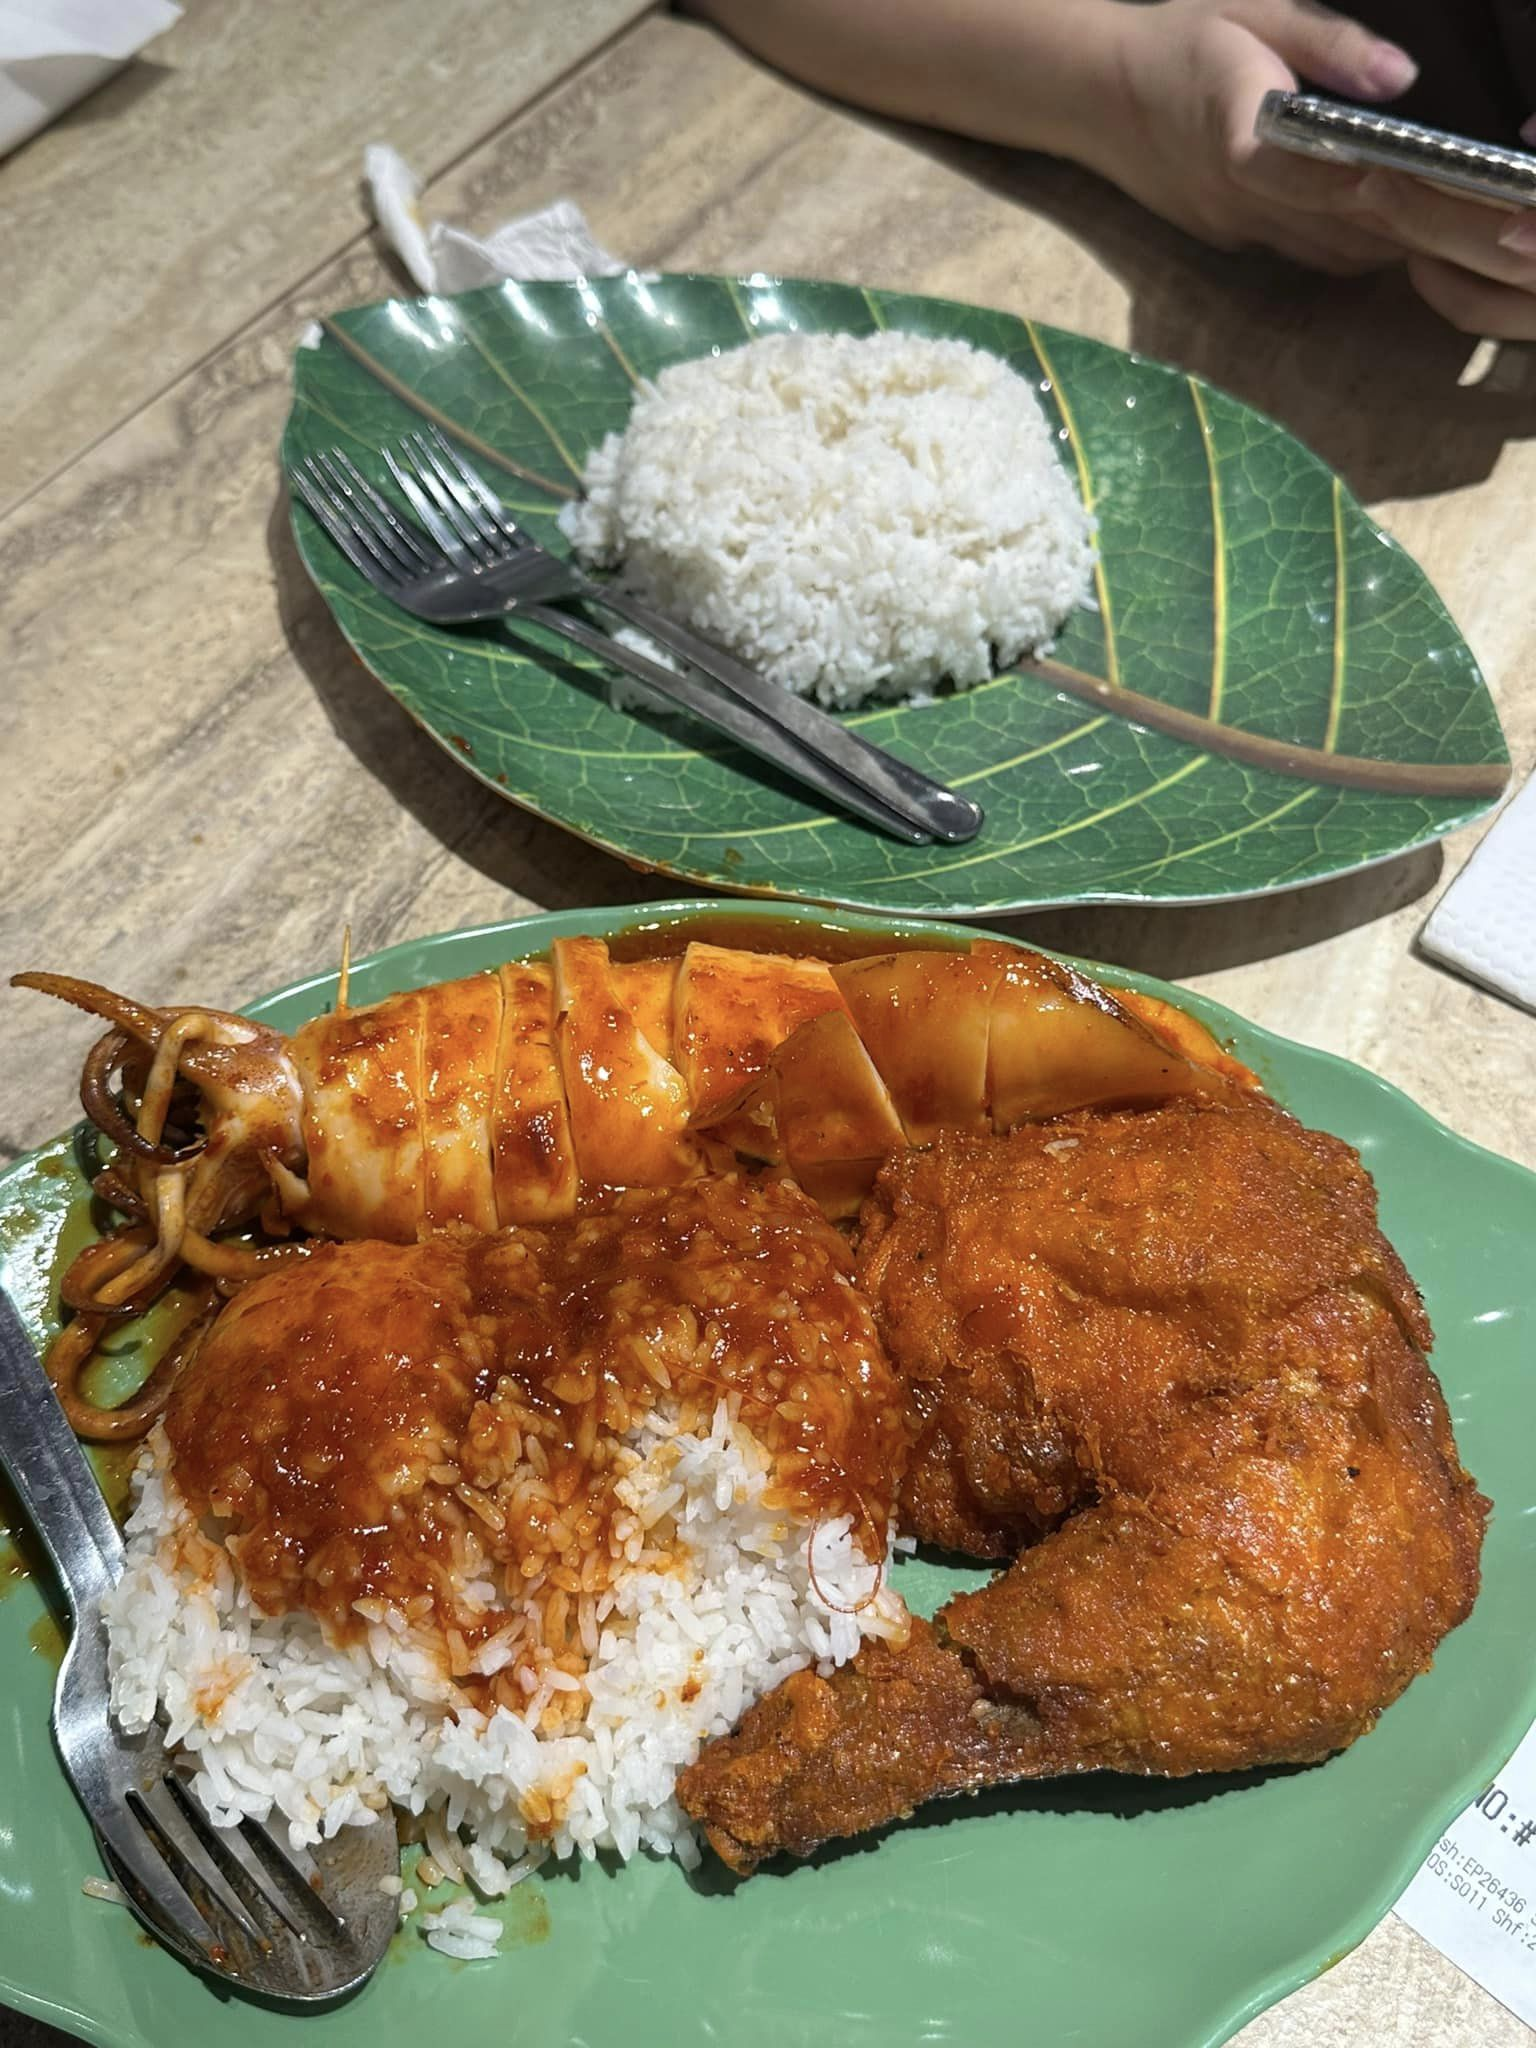 Jb man shocked by rm86 bill for nasi kandar with sotong & fried chicken at pavilion kl